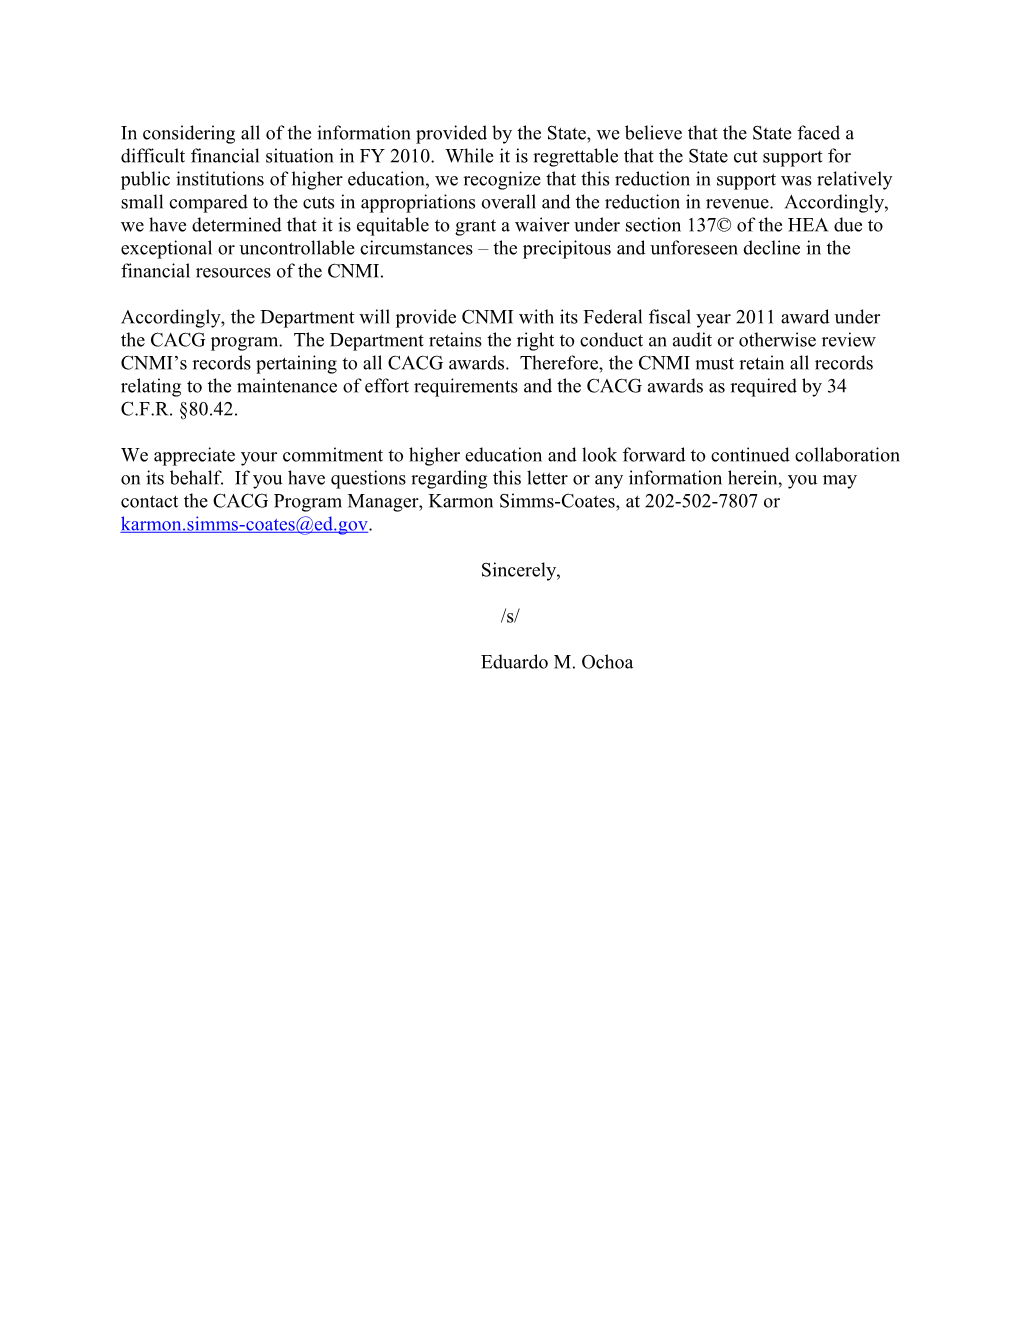 Waiver of the Maintenance of Effort Northern Marianas 2011: College Access Challenge Grant